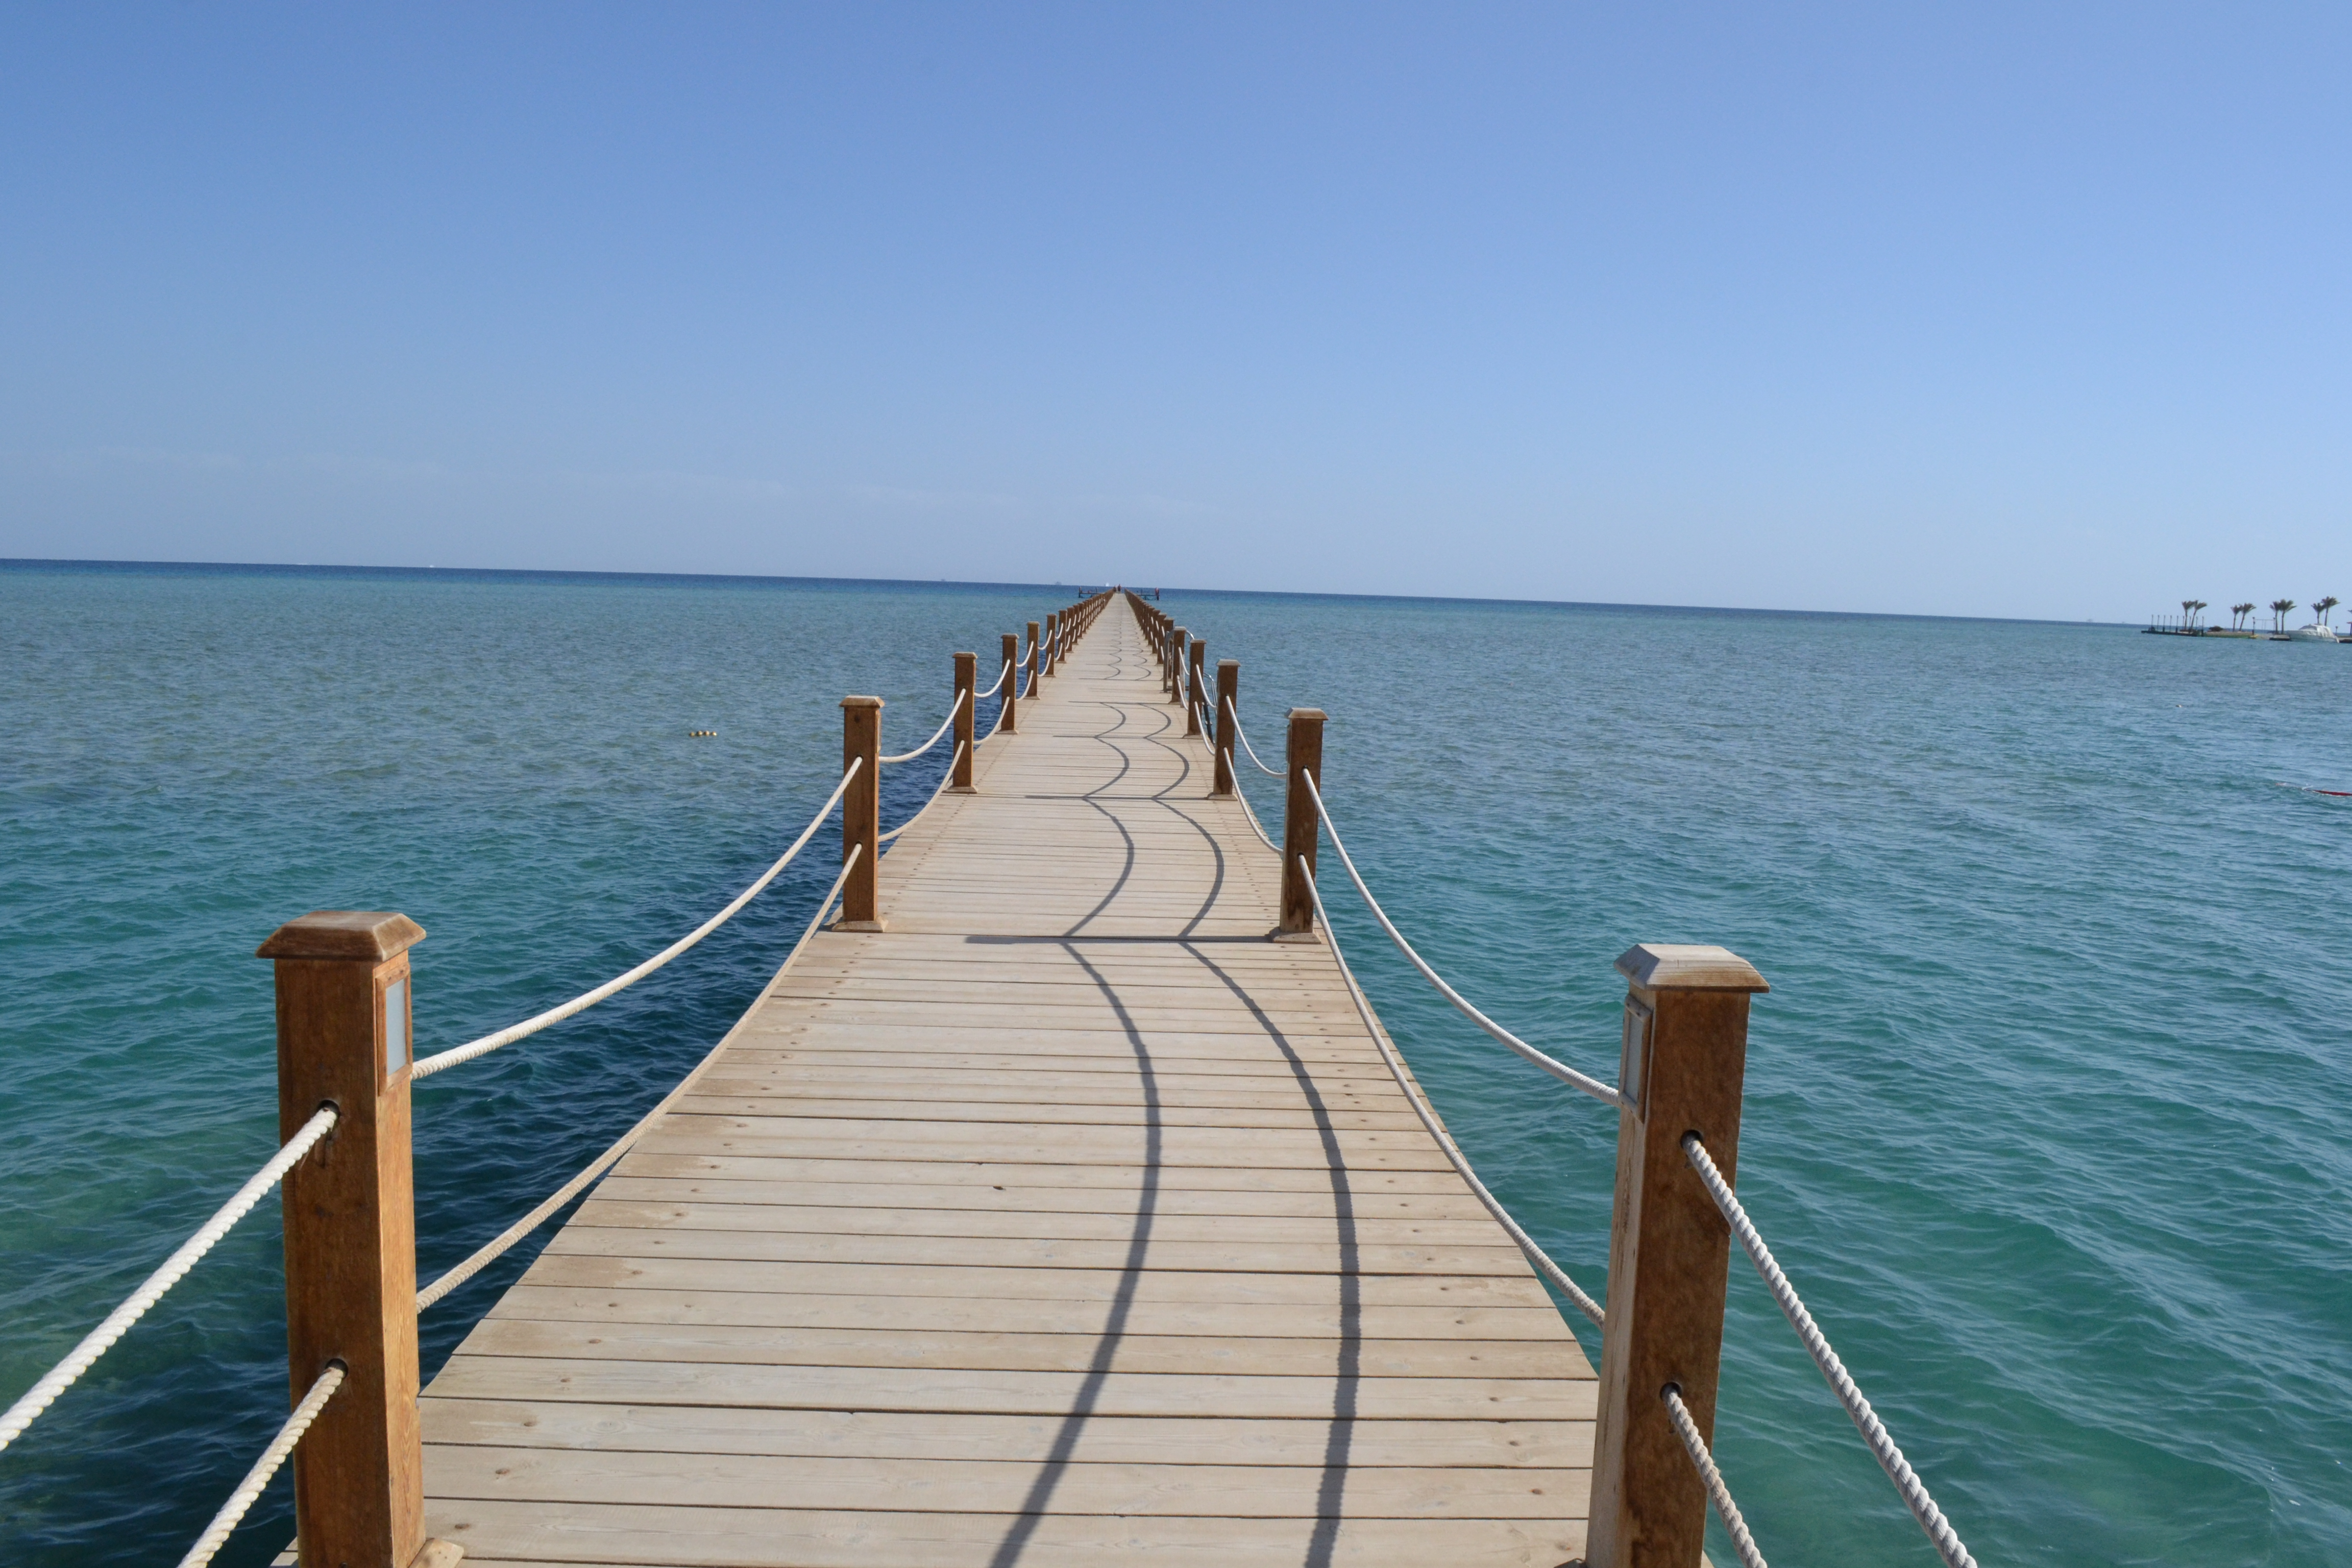 At the end of this pier is where visitors of Sheraton Miramar go for snorkeling. The water is so clear that you can see fish swimming beneath the pier. 